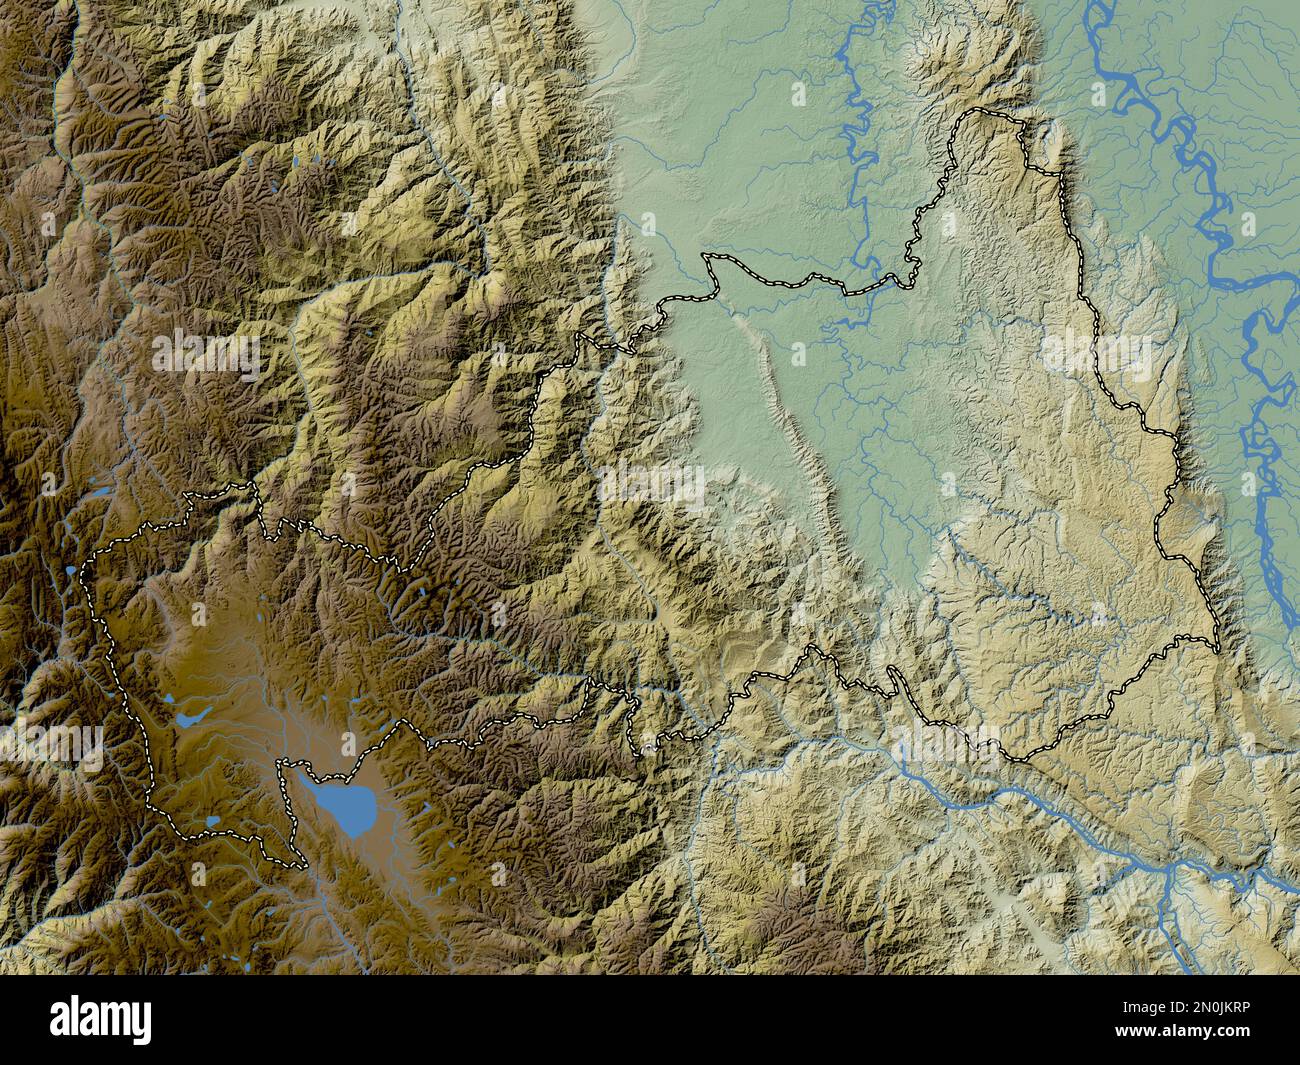 Pasco, region of Peru. Colored elevation map with lakes and rivers Stock Photo